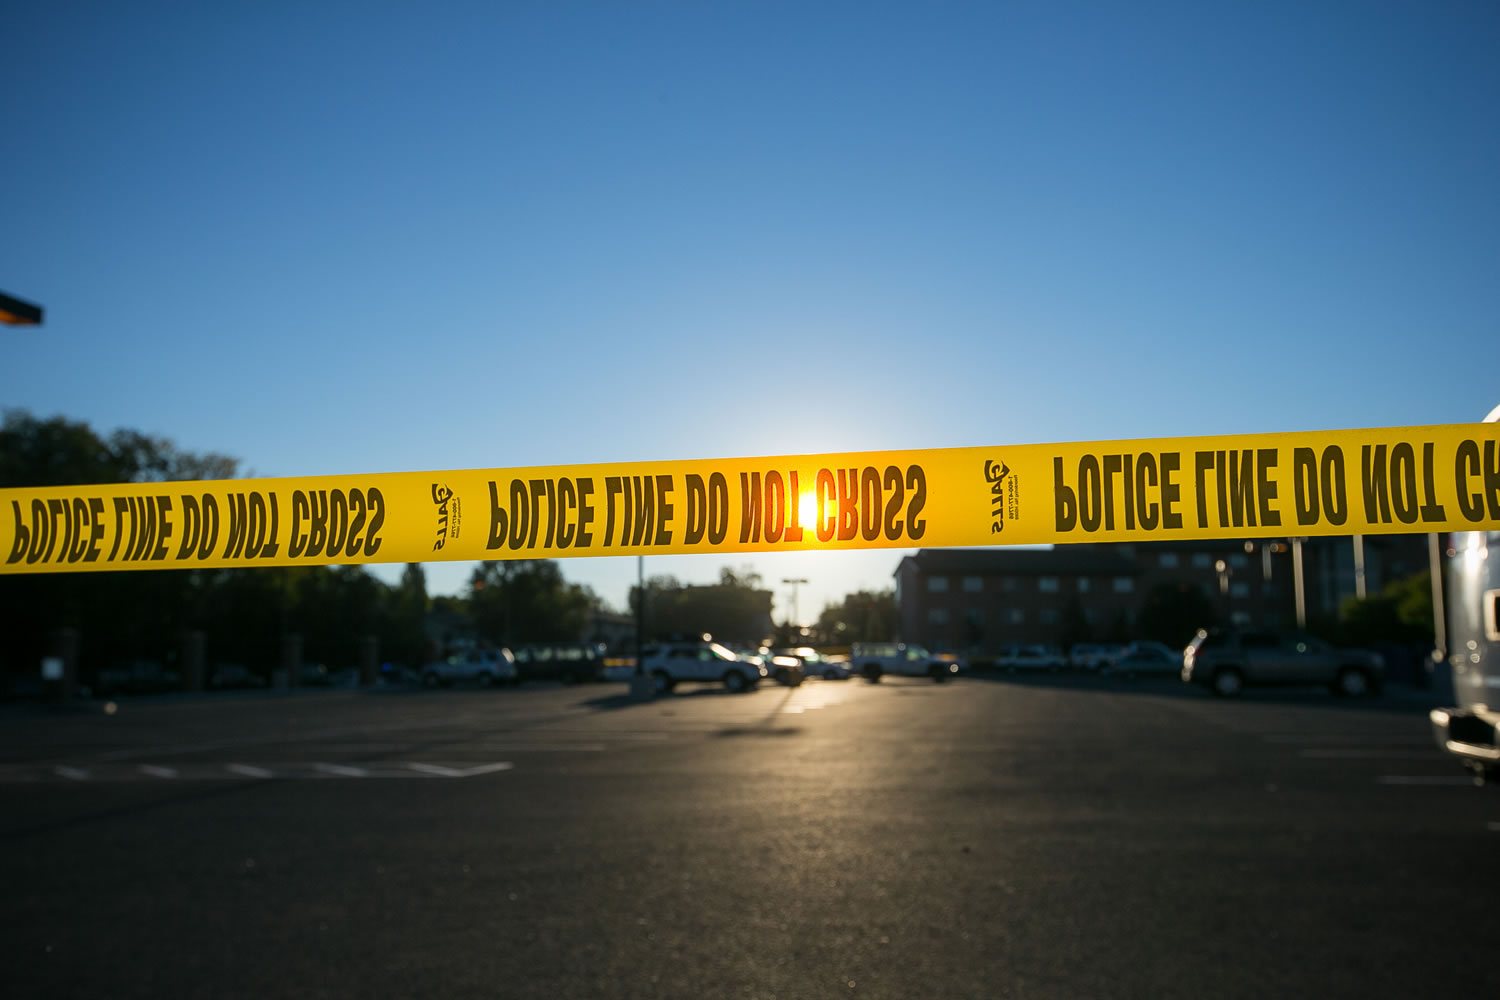 Police tape stretches across a section of street by Northern Arizona University campus in Flagstaff, Ariz., on Friday, Oct. 9, 2015,  after an early morning fight between two groups of college students escalated into gunfire leaving one person dead and three others wounded, authorities said.